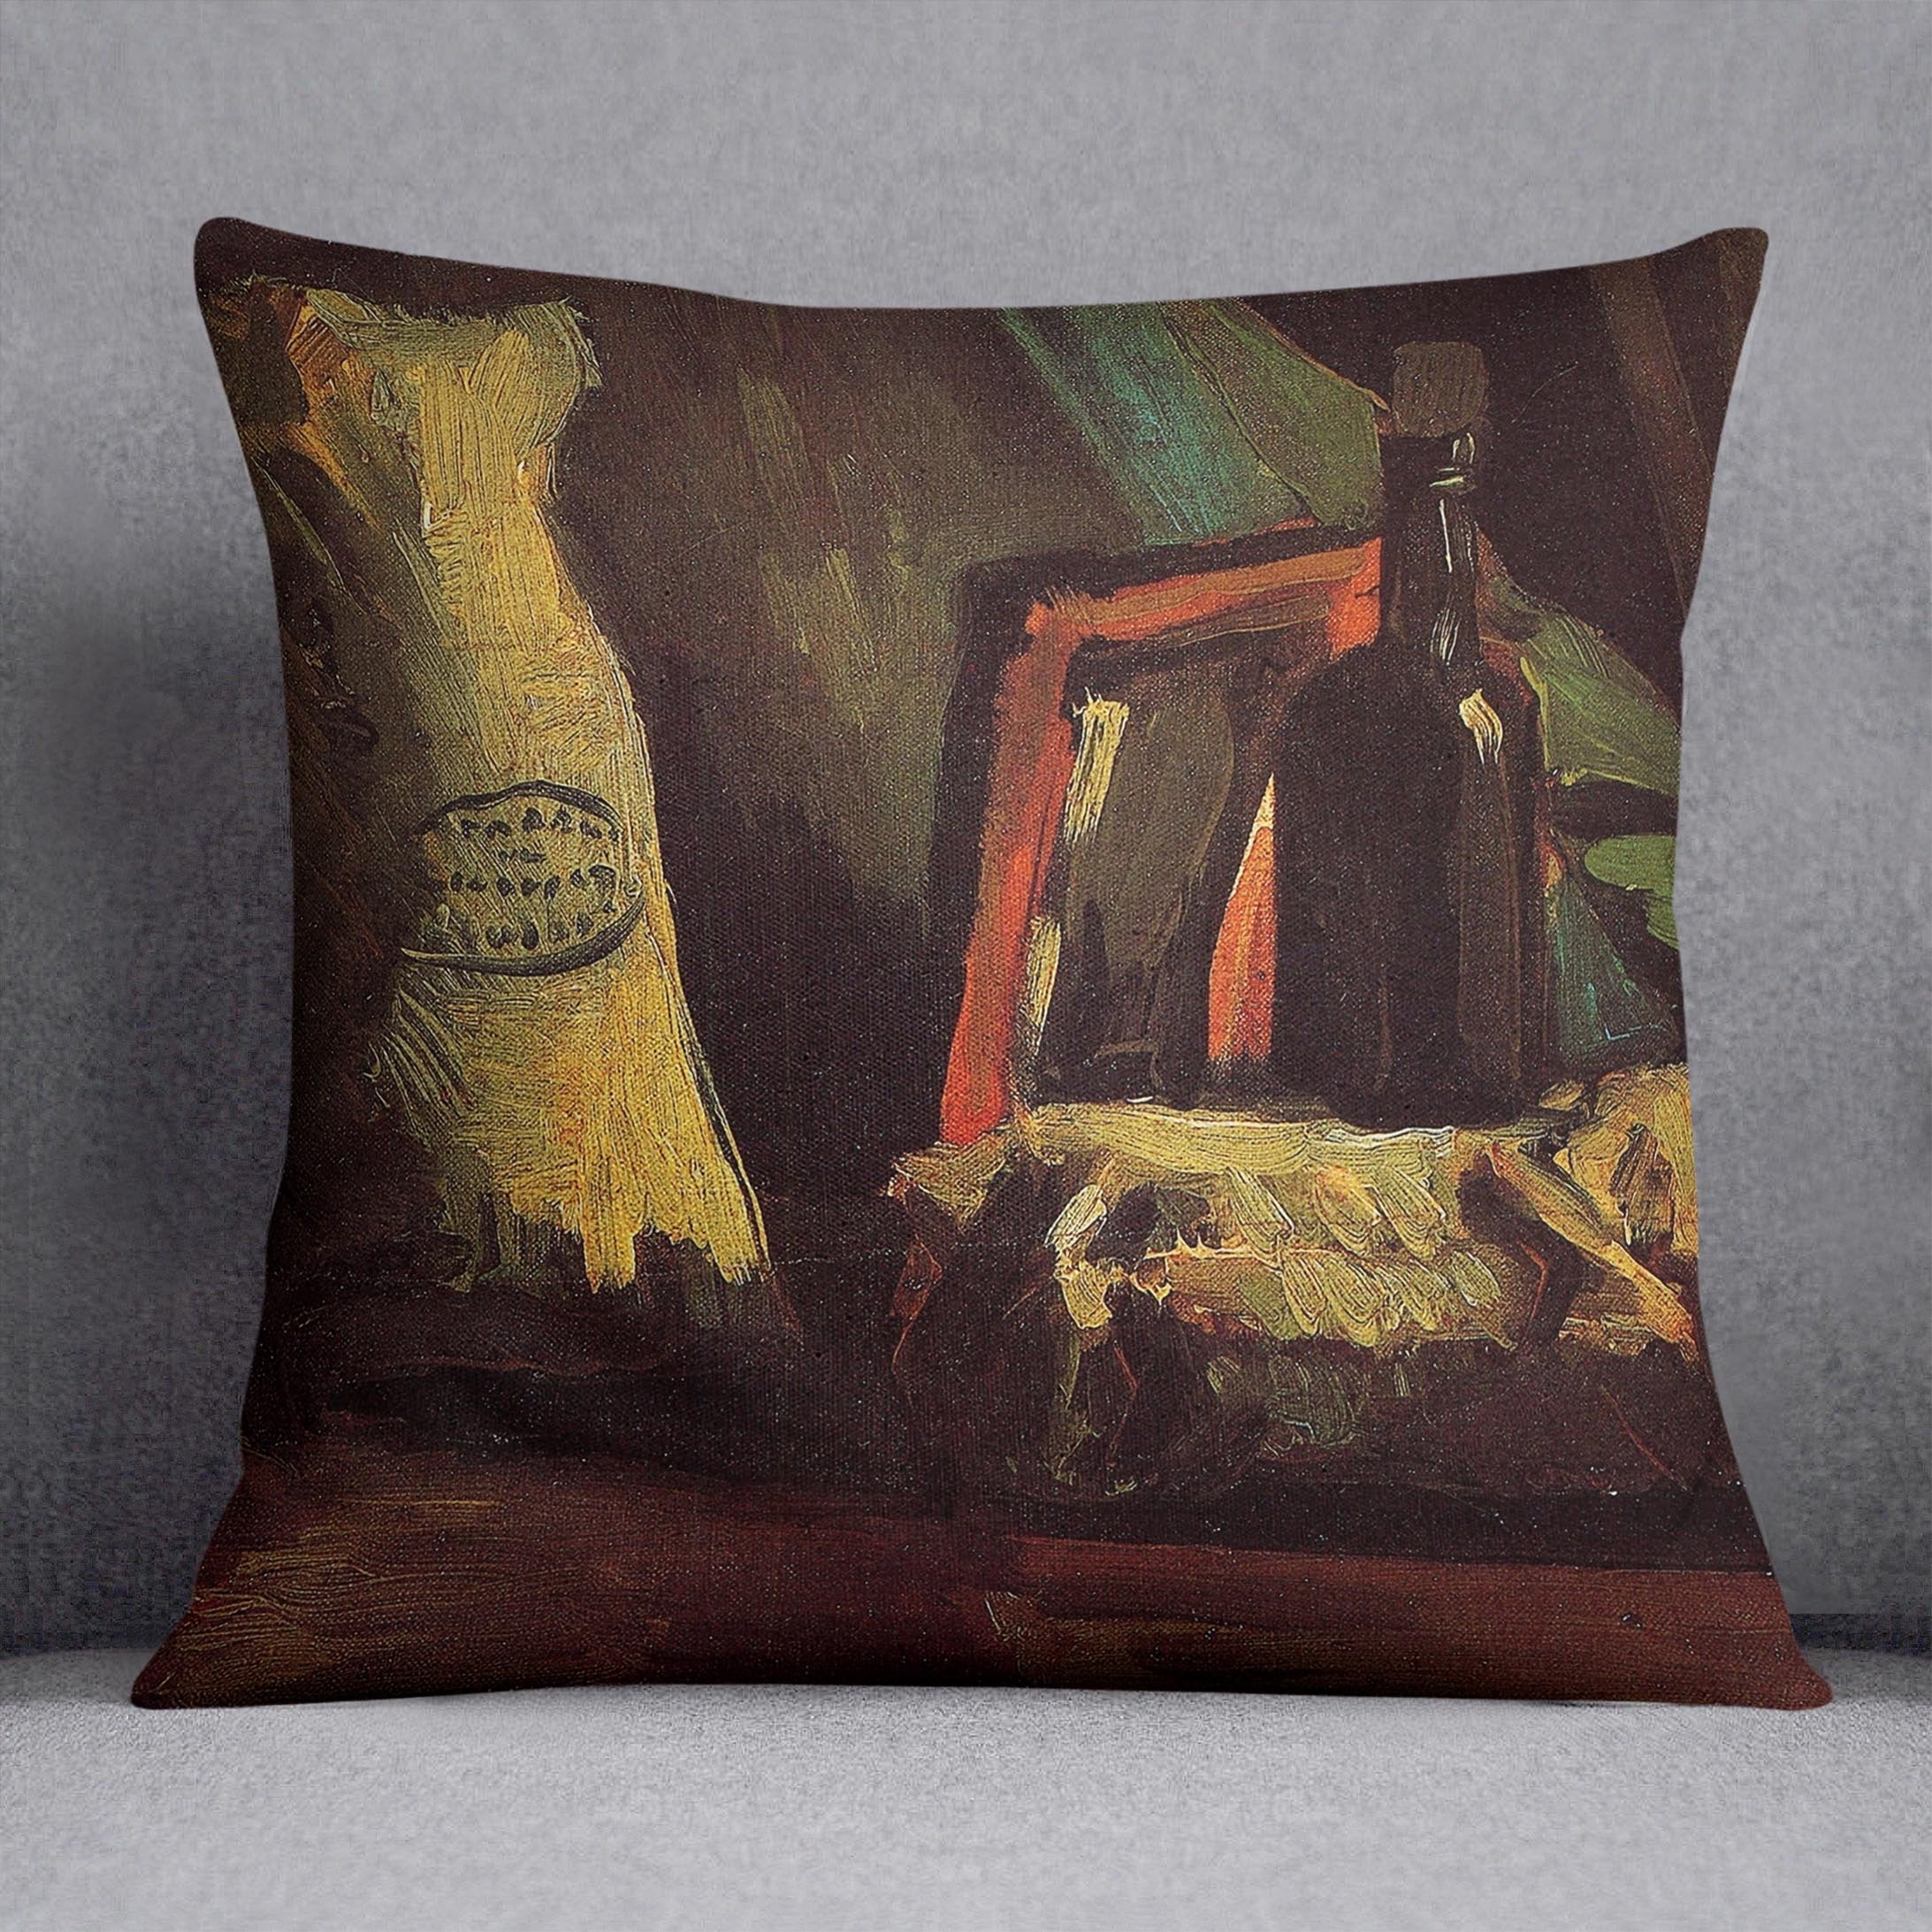 Still Life with Two Sacks and a Bottl by Van Gogh Throw Pillow